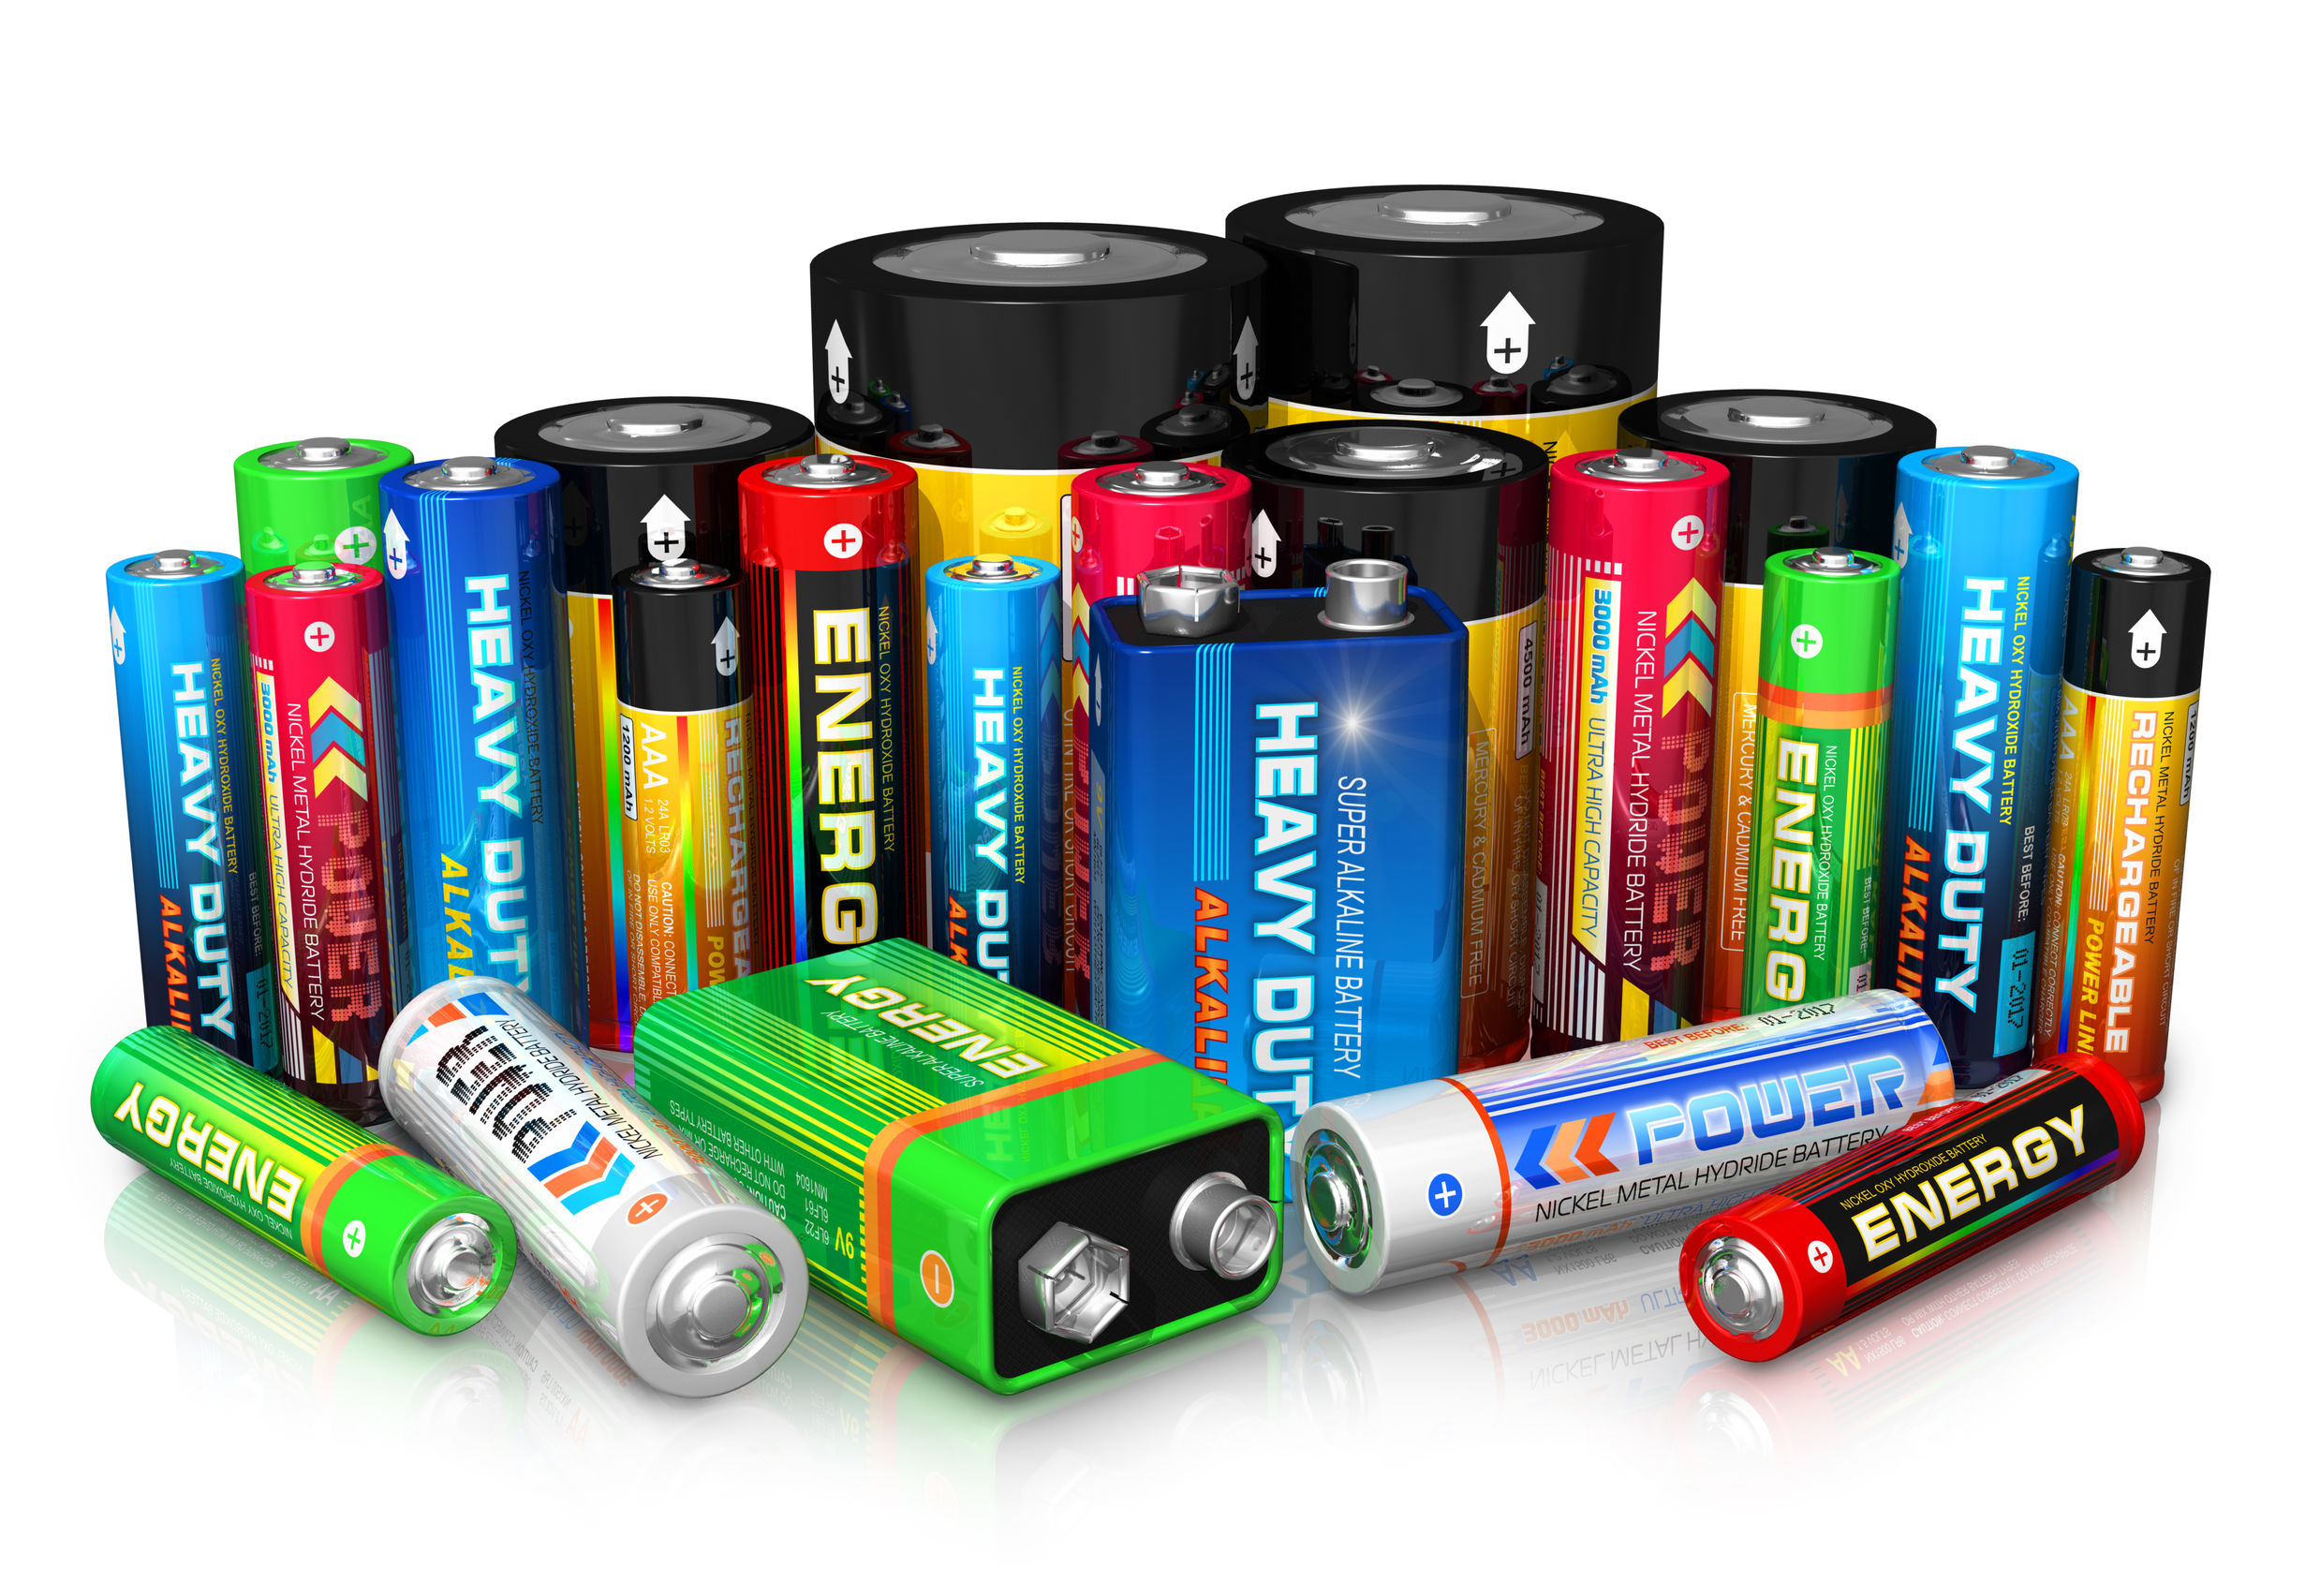 NH Helps Lead the Charge to Recycle Batteries